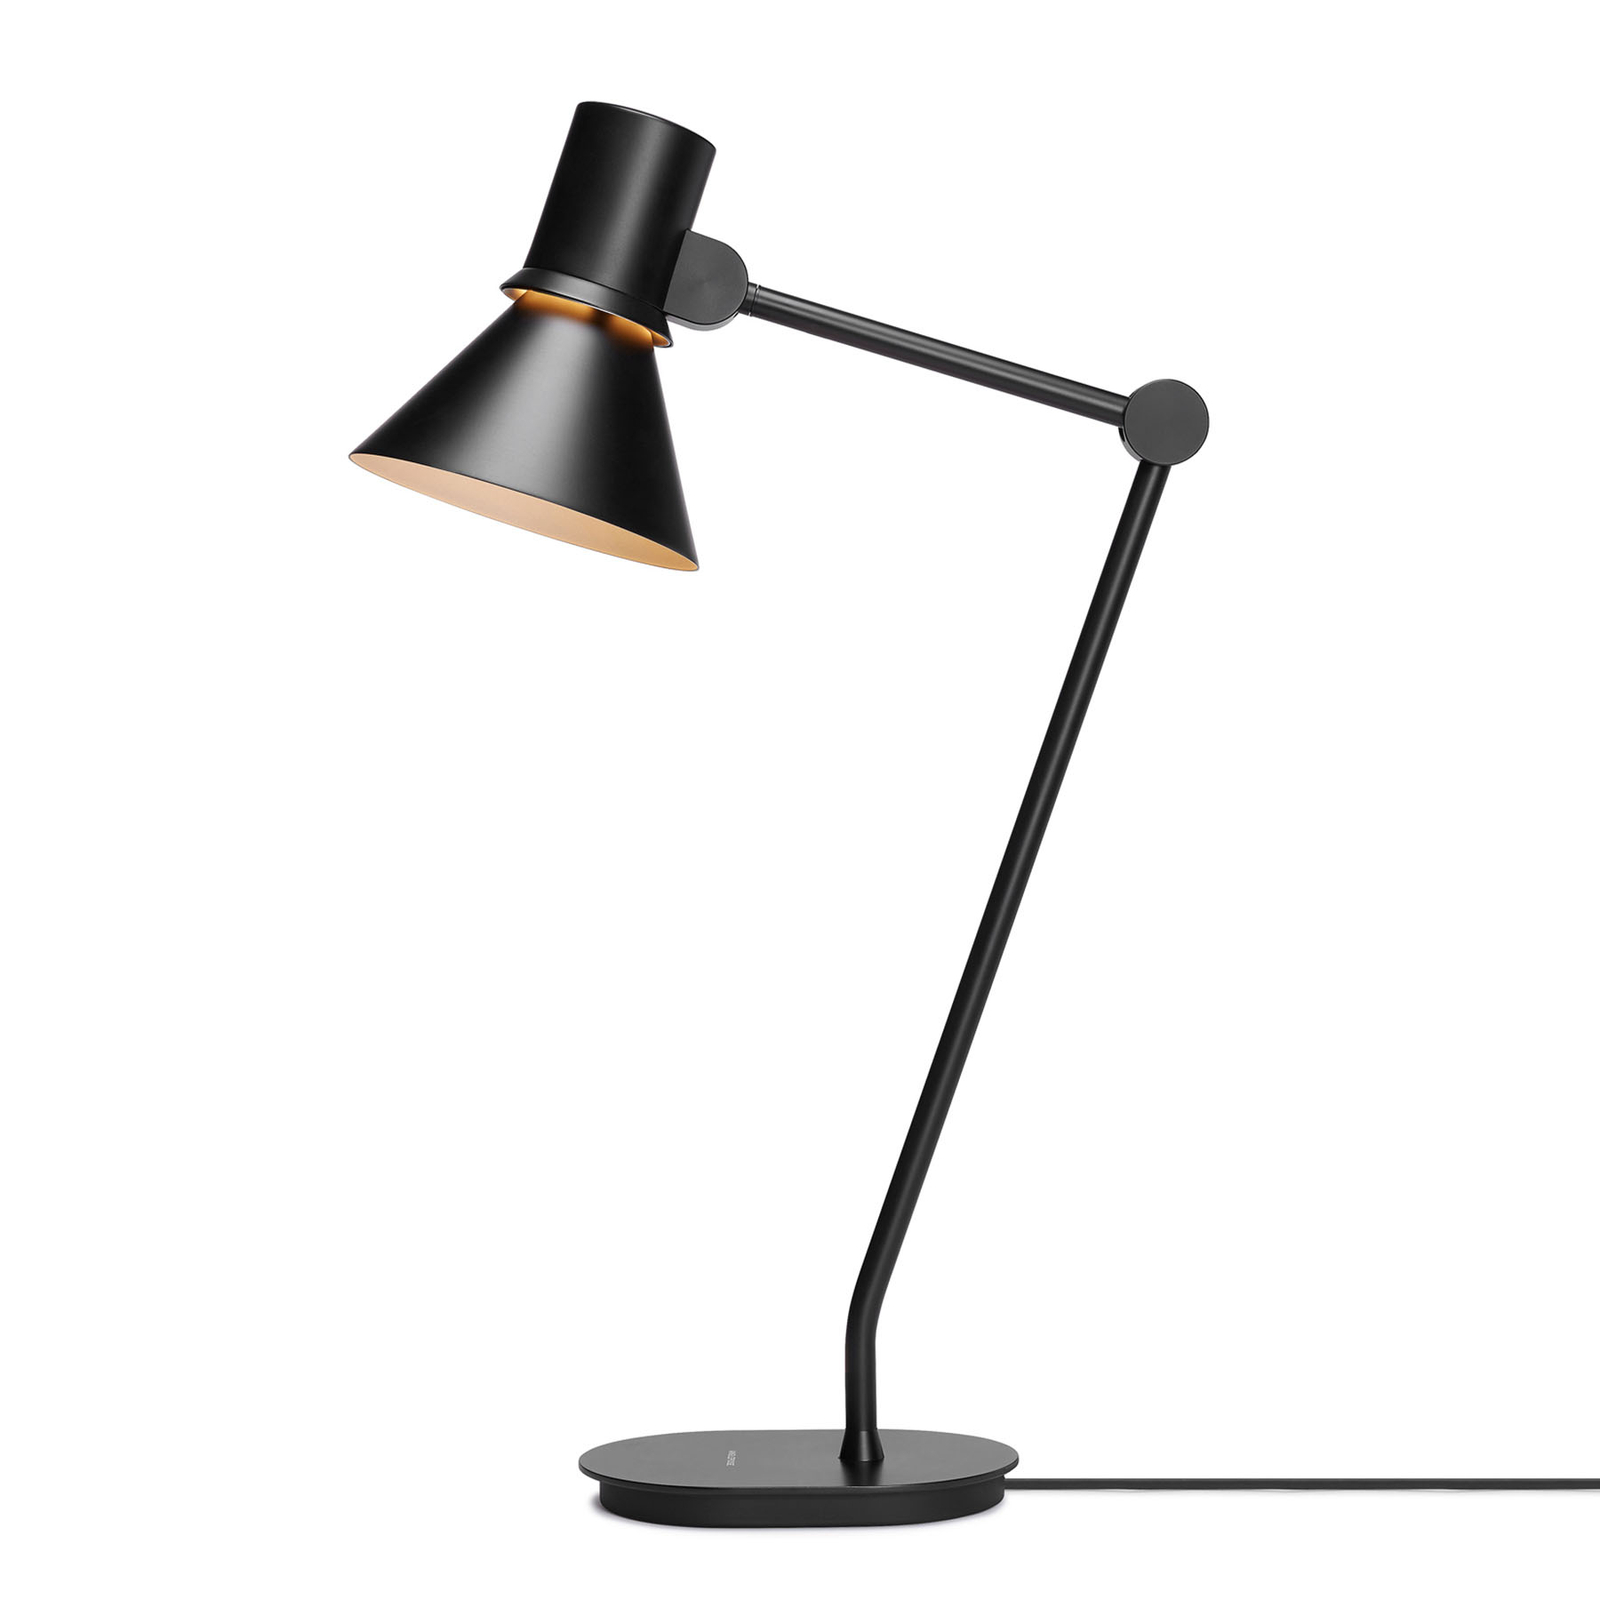 Anglepoise Type 80 lampe à poser, noire mate